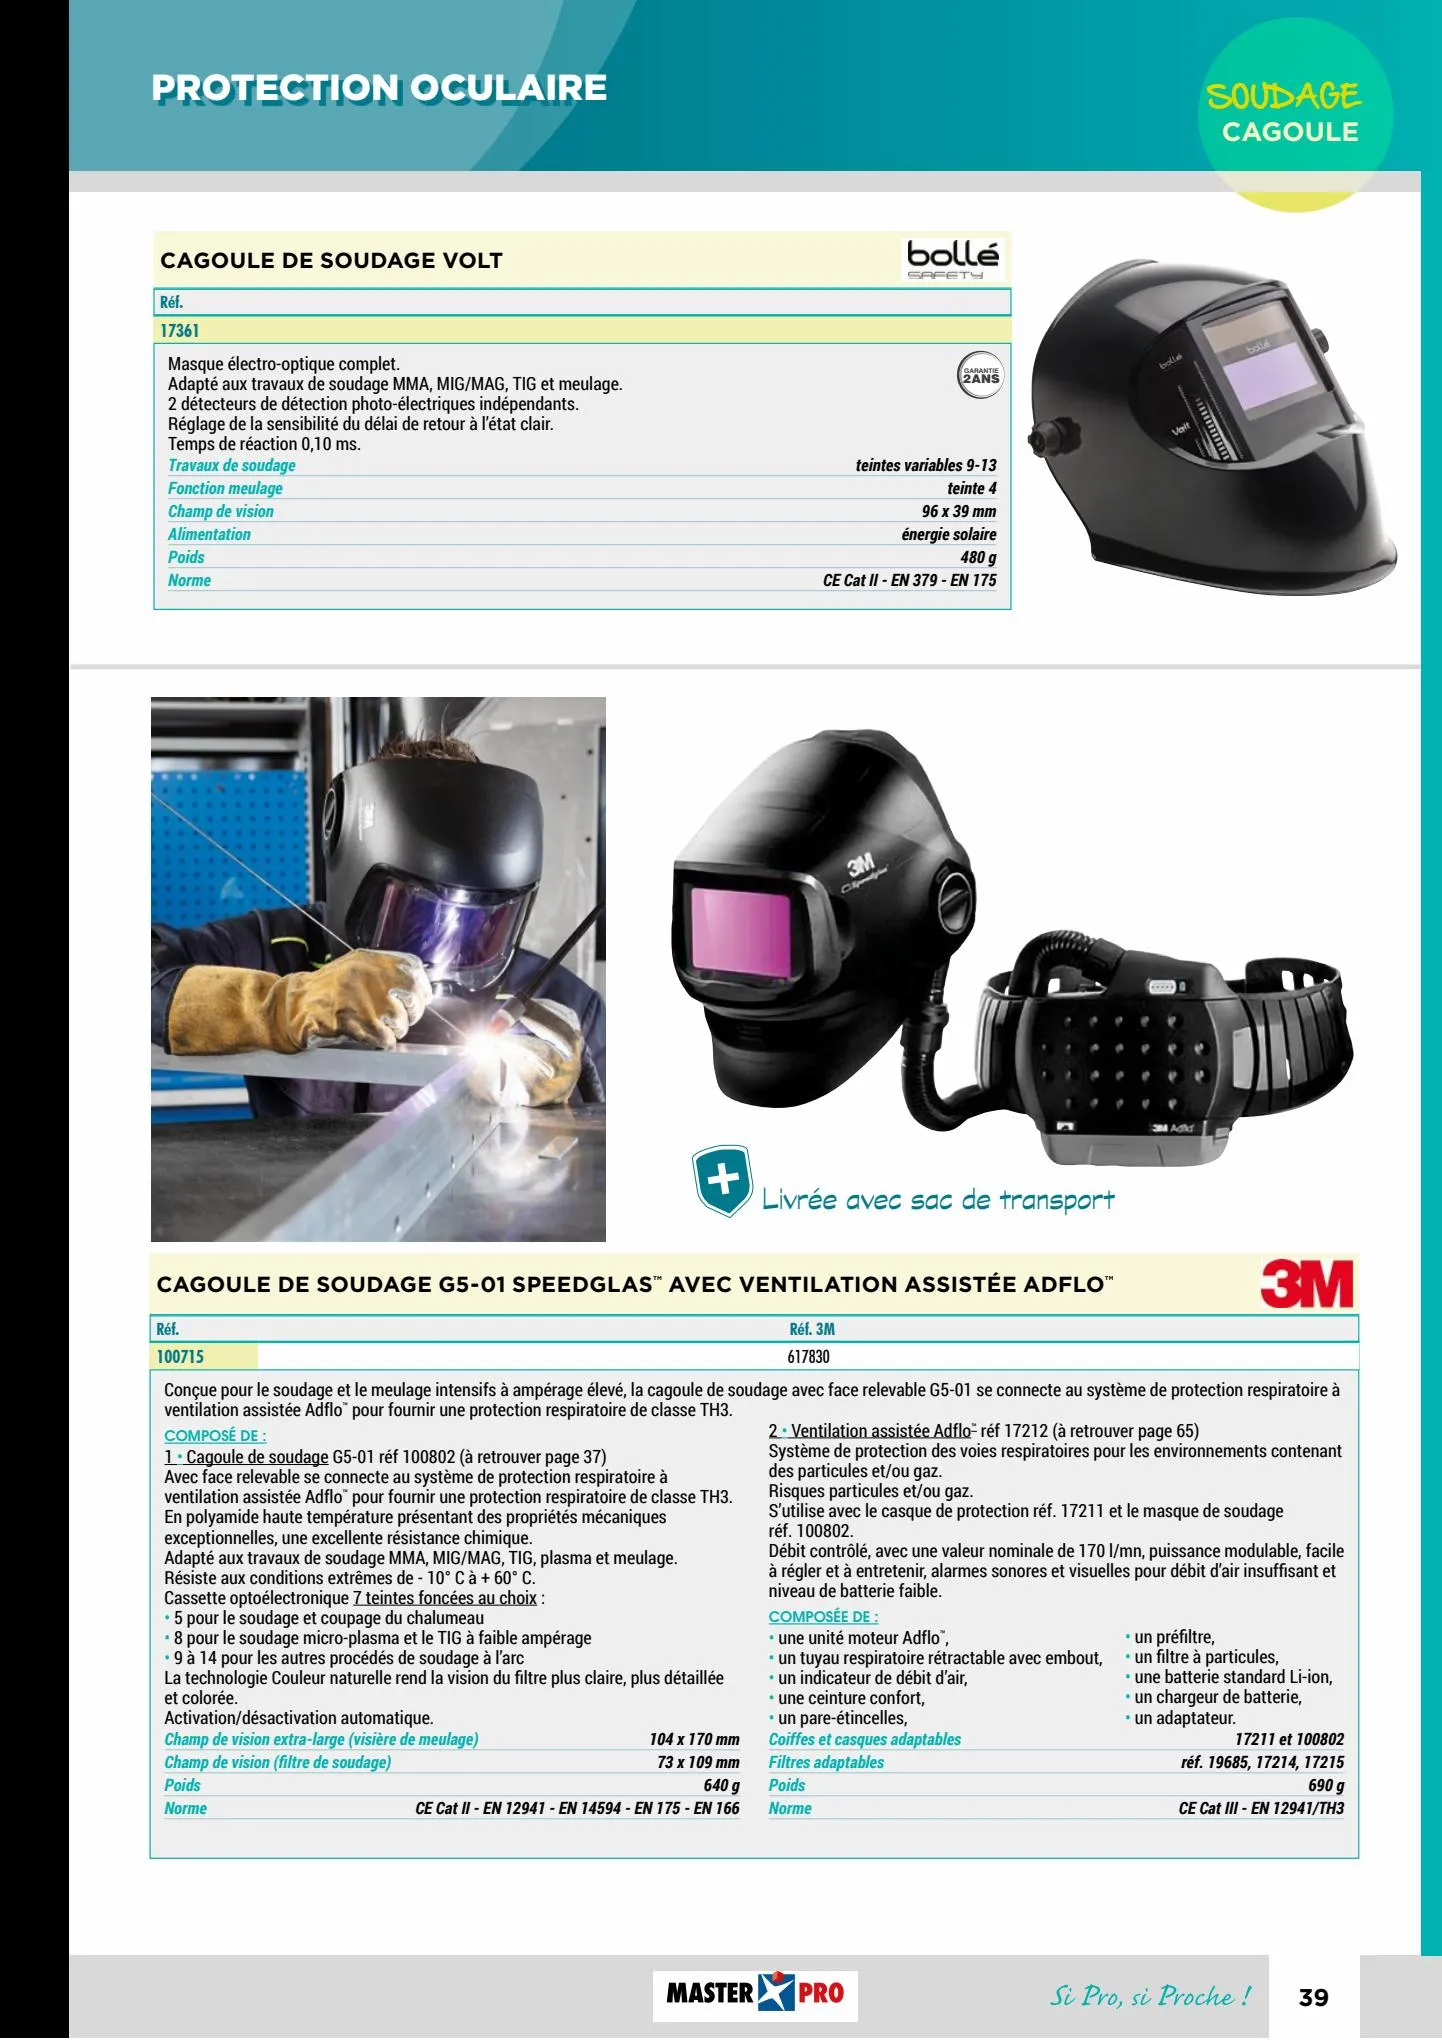 Catalogue Equipment de protection individual, page 00041